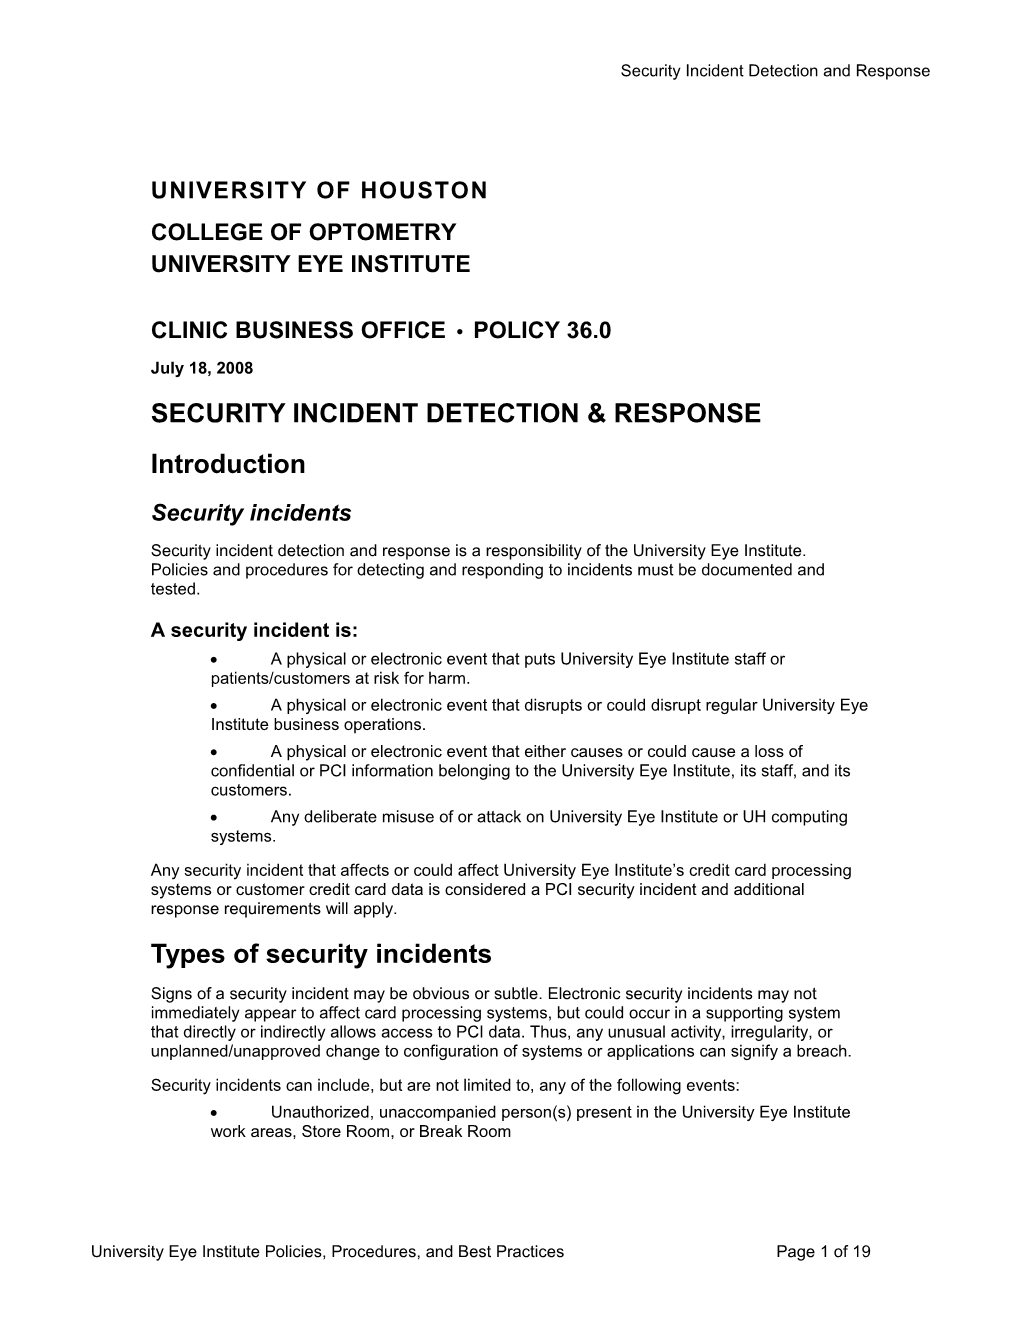 Security Incident Detection And Response Plan